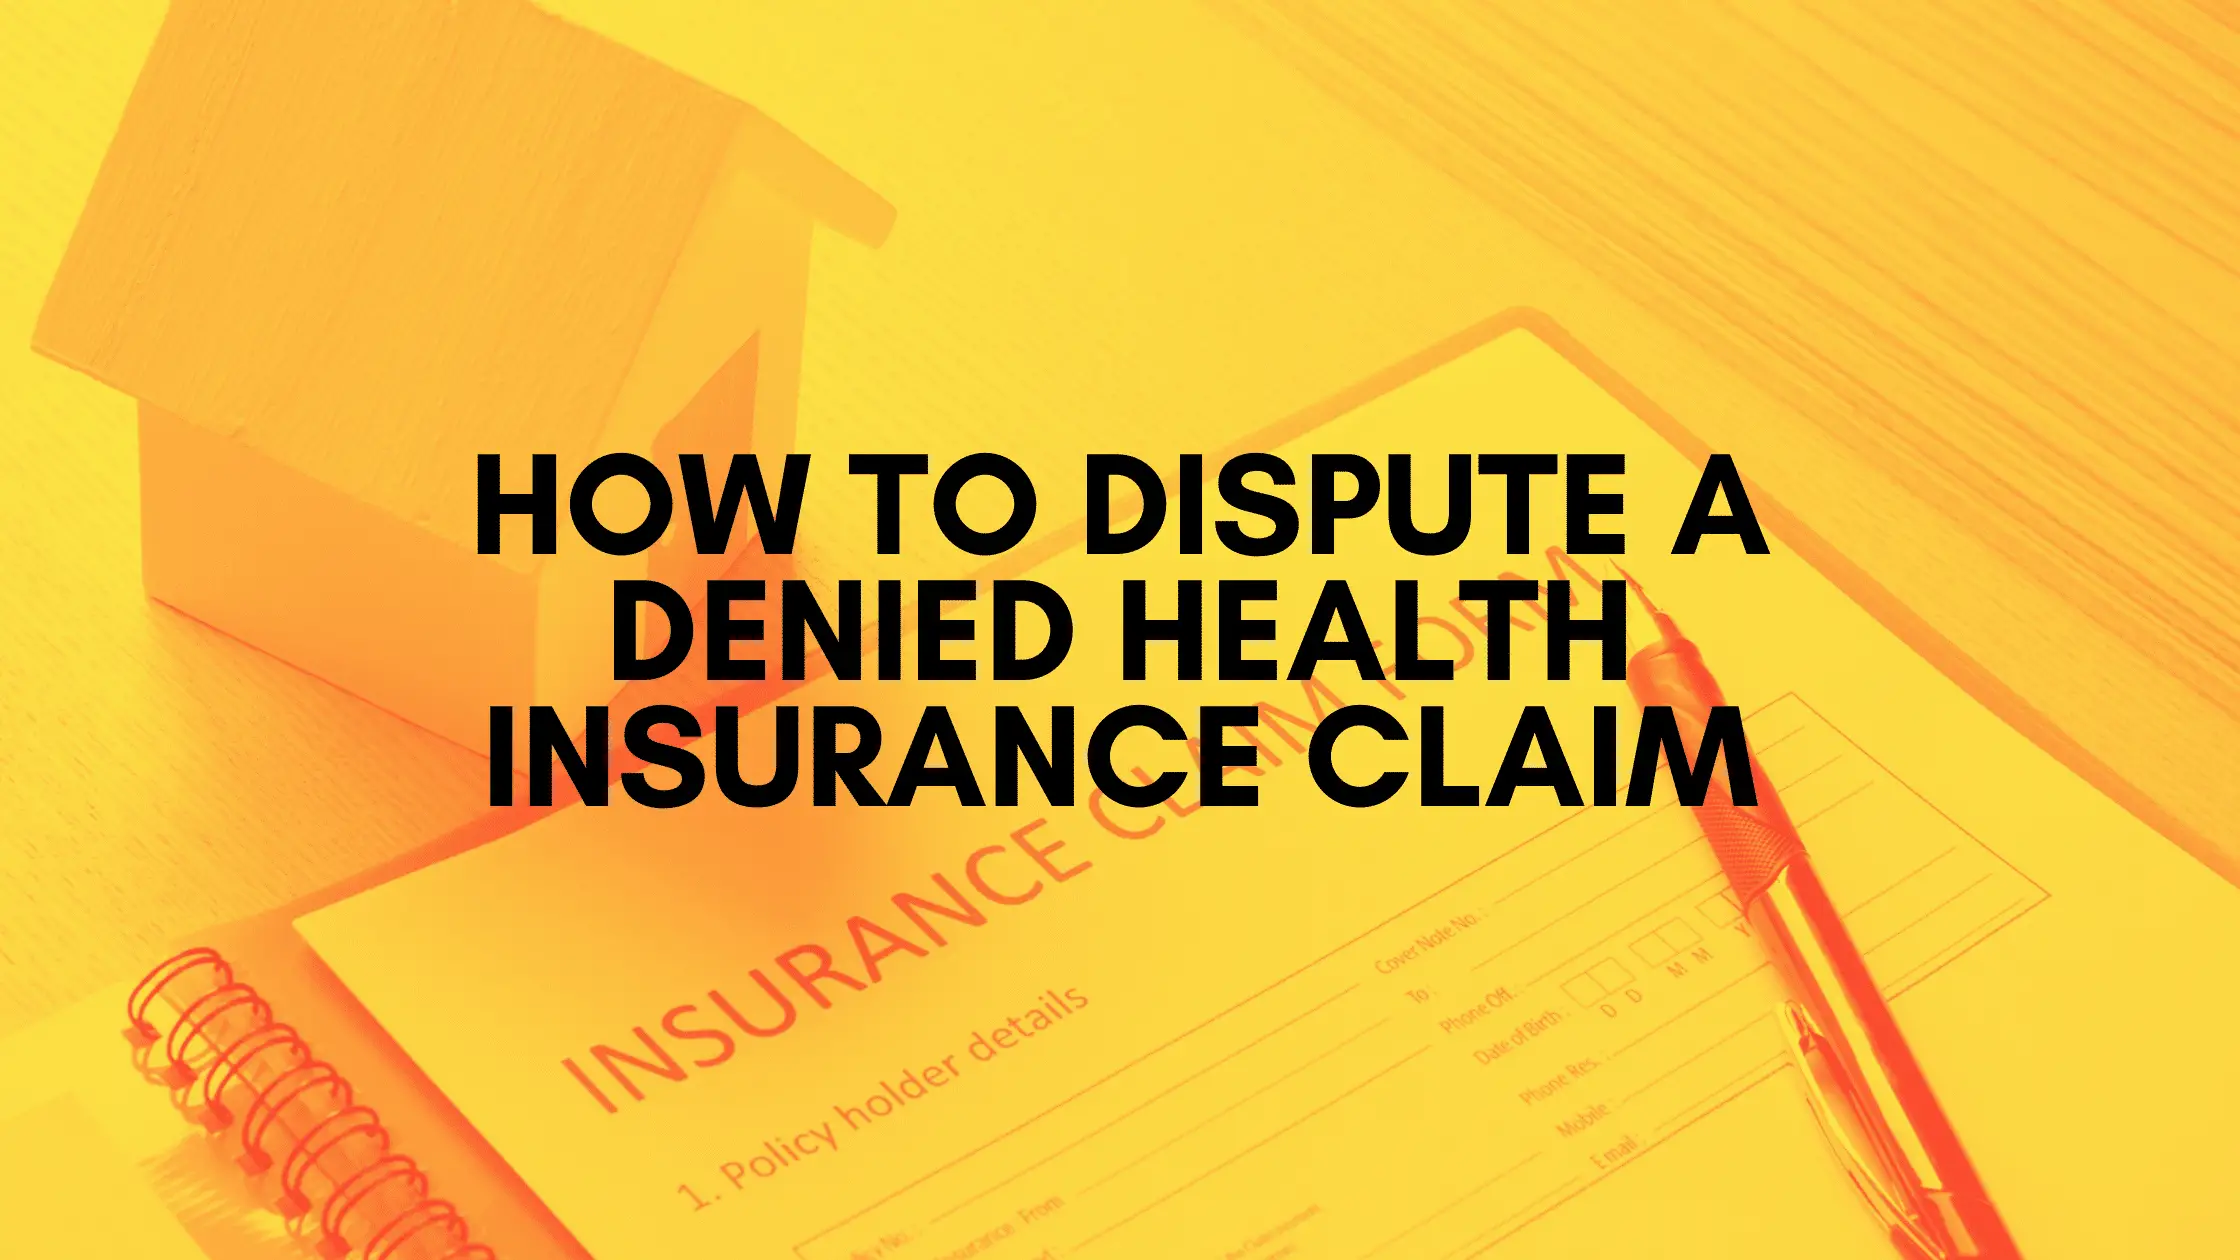 Insurance form with blog title on it